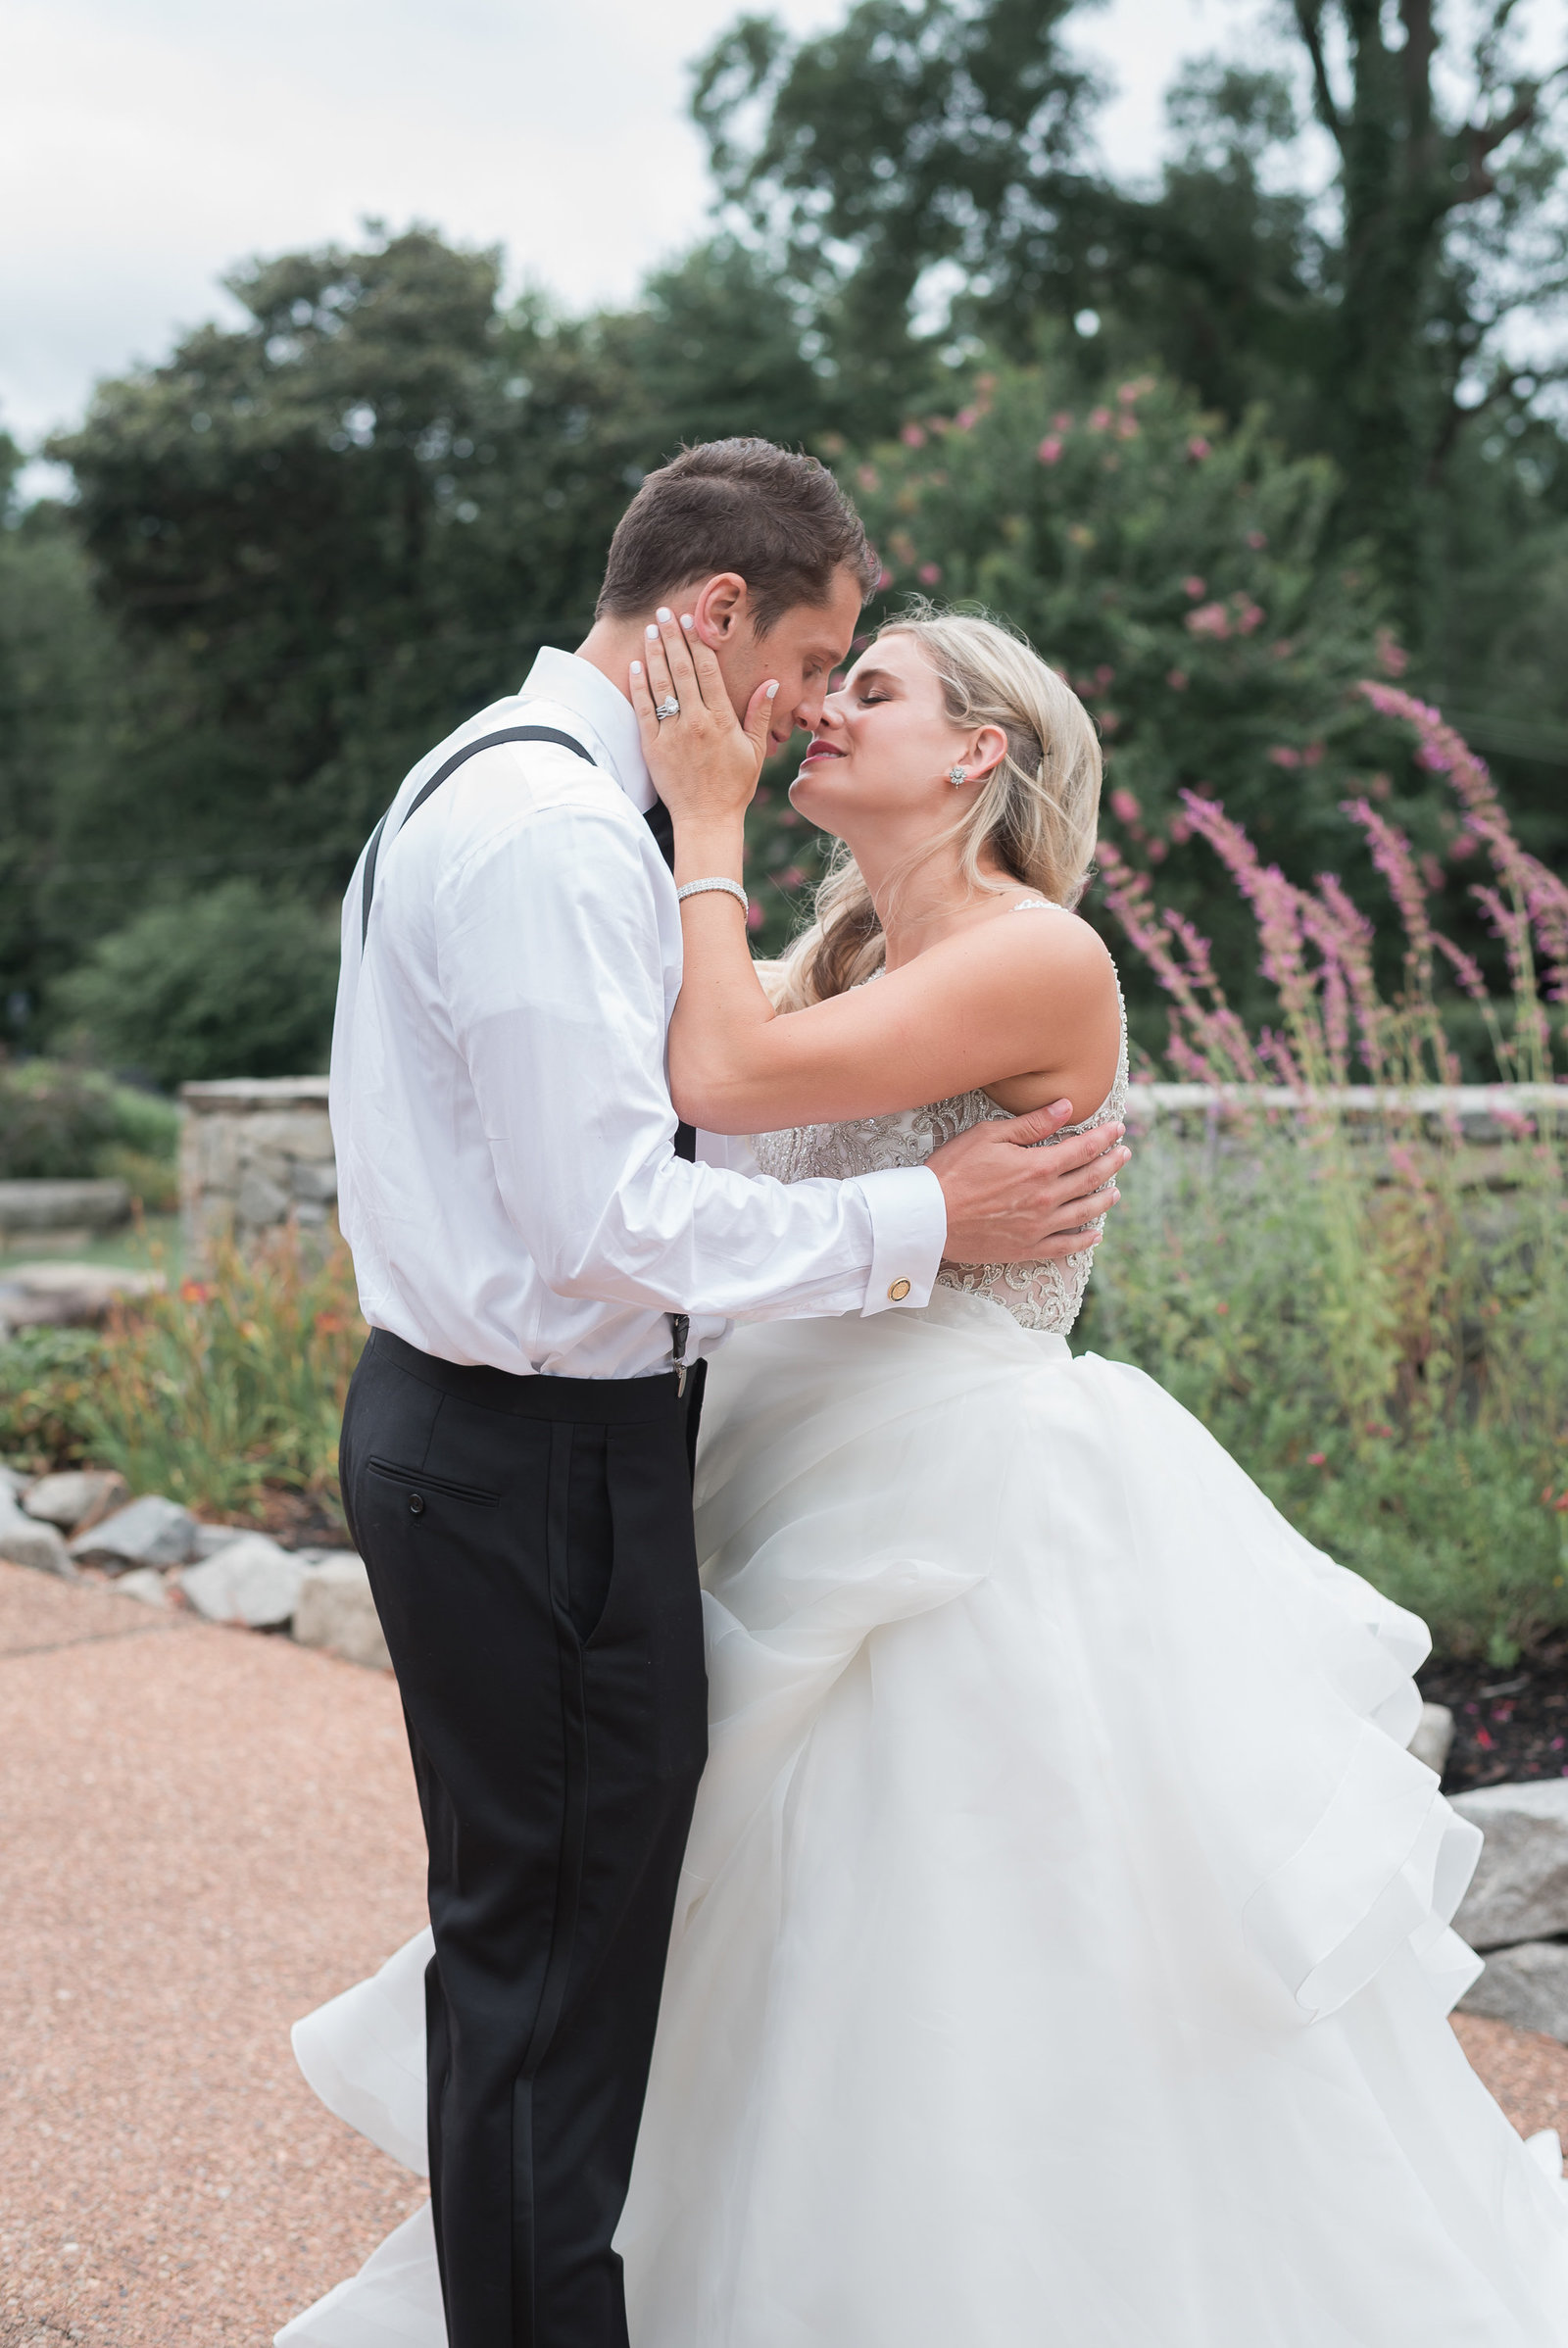 Byra-and-Nick-Willow-Oaks-Country-Club-Wedding-Melissa-Desjardins-Photography-9